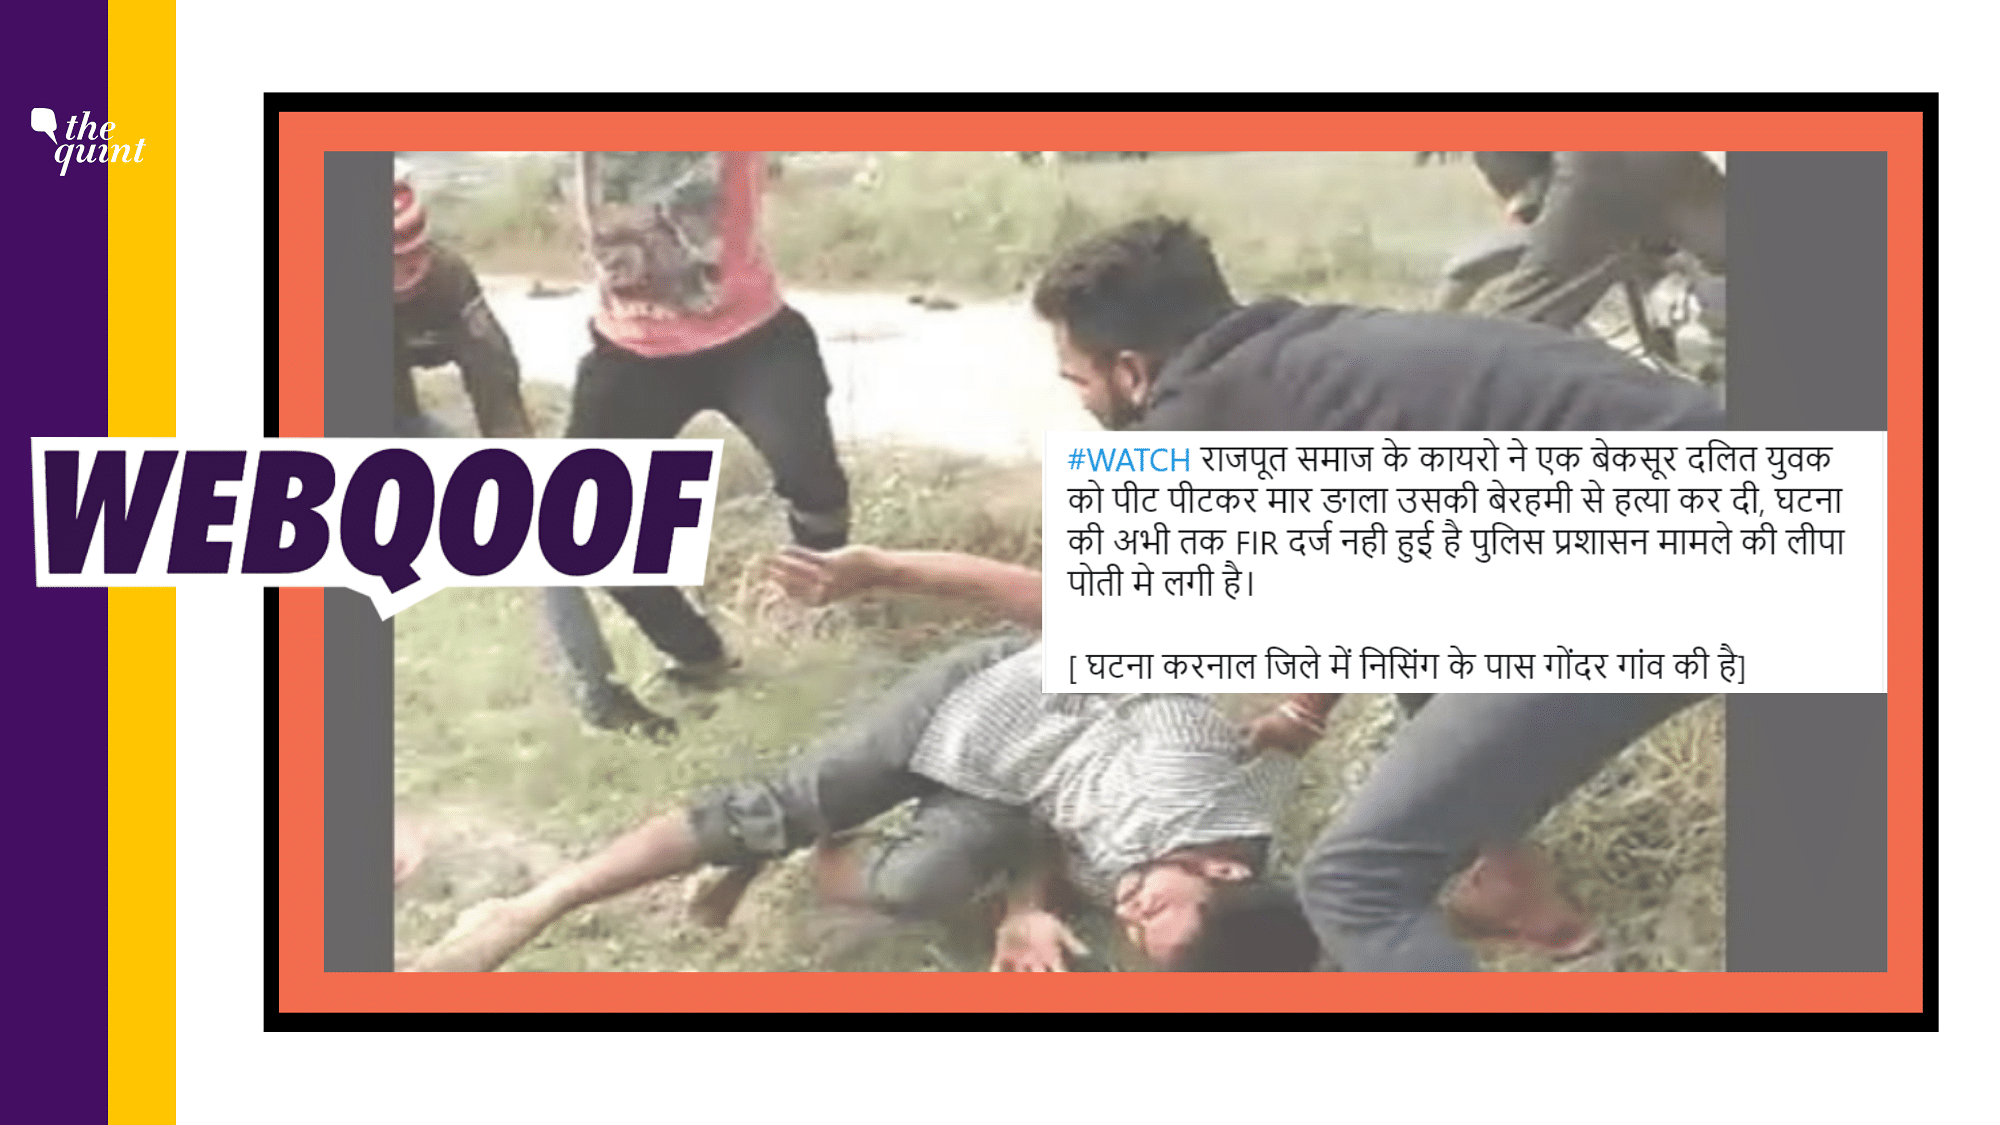 The video, shared with the claim that the man was beaten to death because he is a Dalit, is completely false.